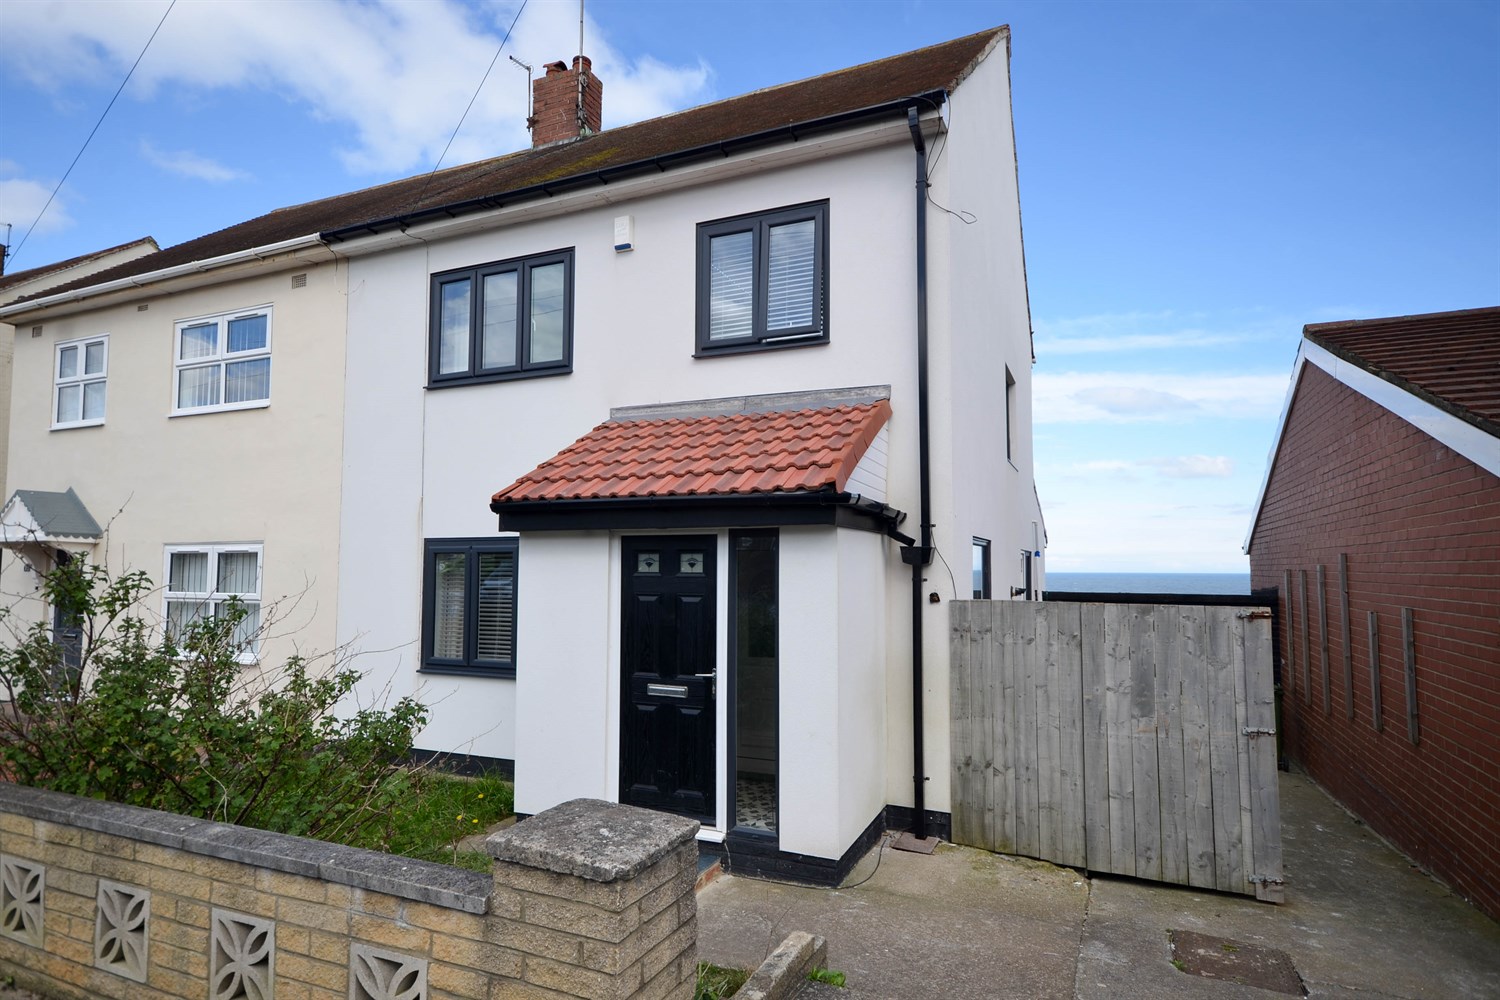 3 bed semi-detached house for sale in Norfolk Road, South Shields - Property Image 1